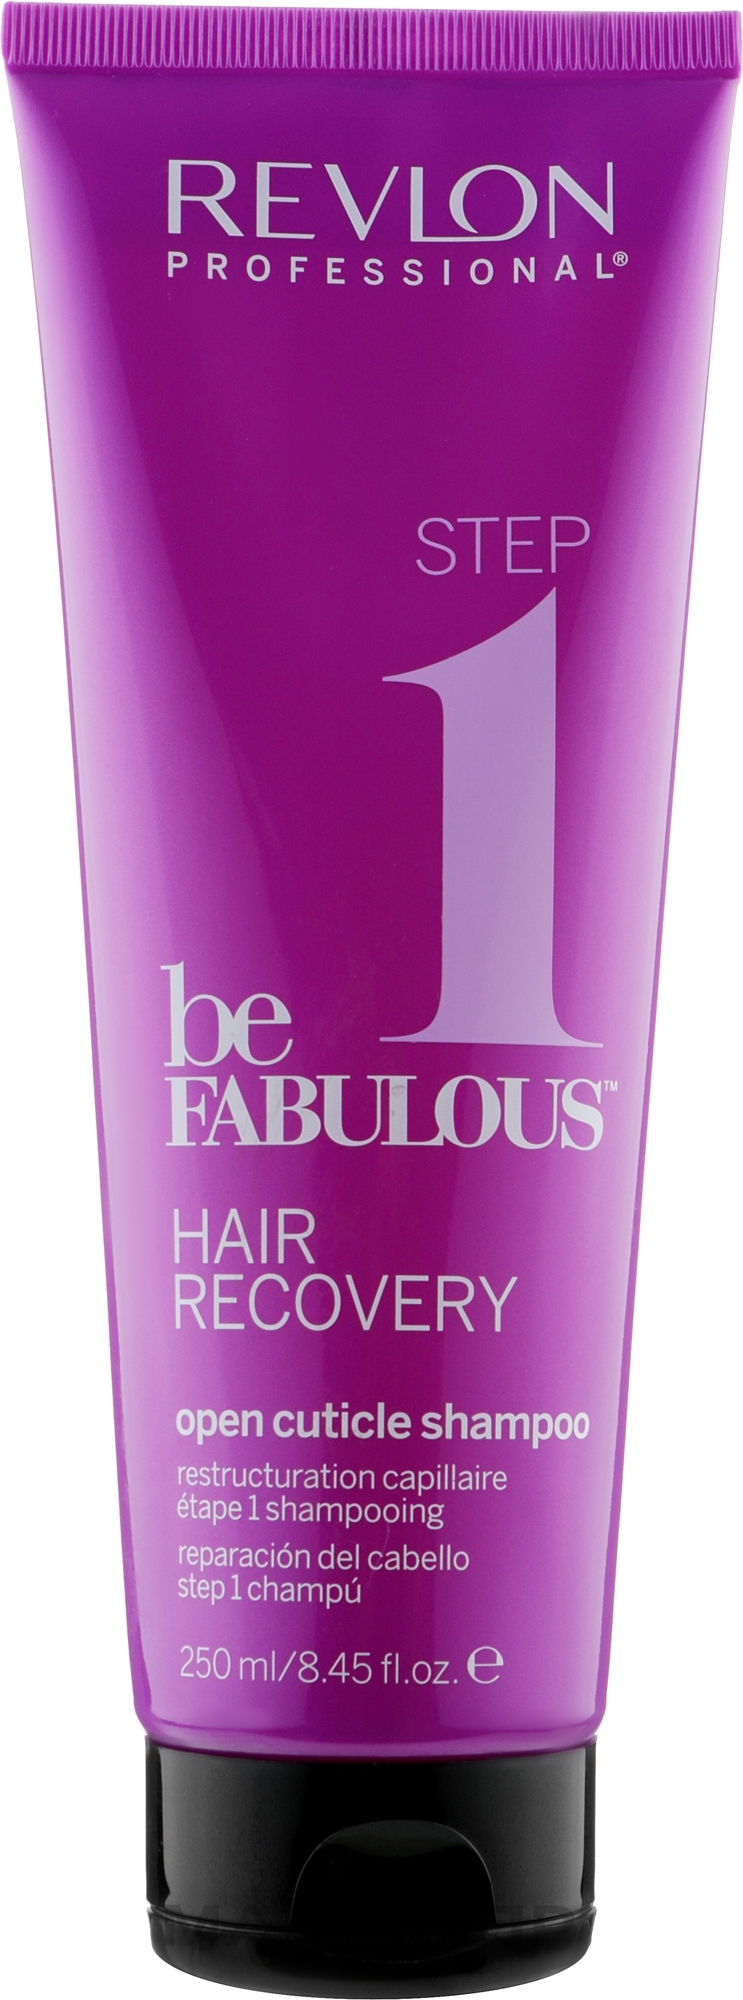 Cleansing Open Cuticle Shampoo, step 1 - Revlon Professional Be Fabulous Hair Recovery Shampoo — photo 250 ml